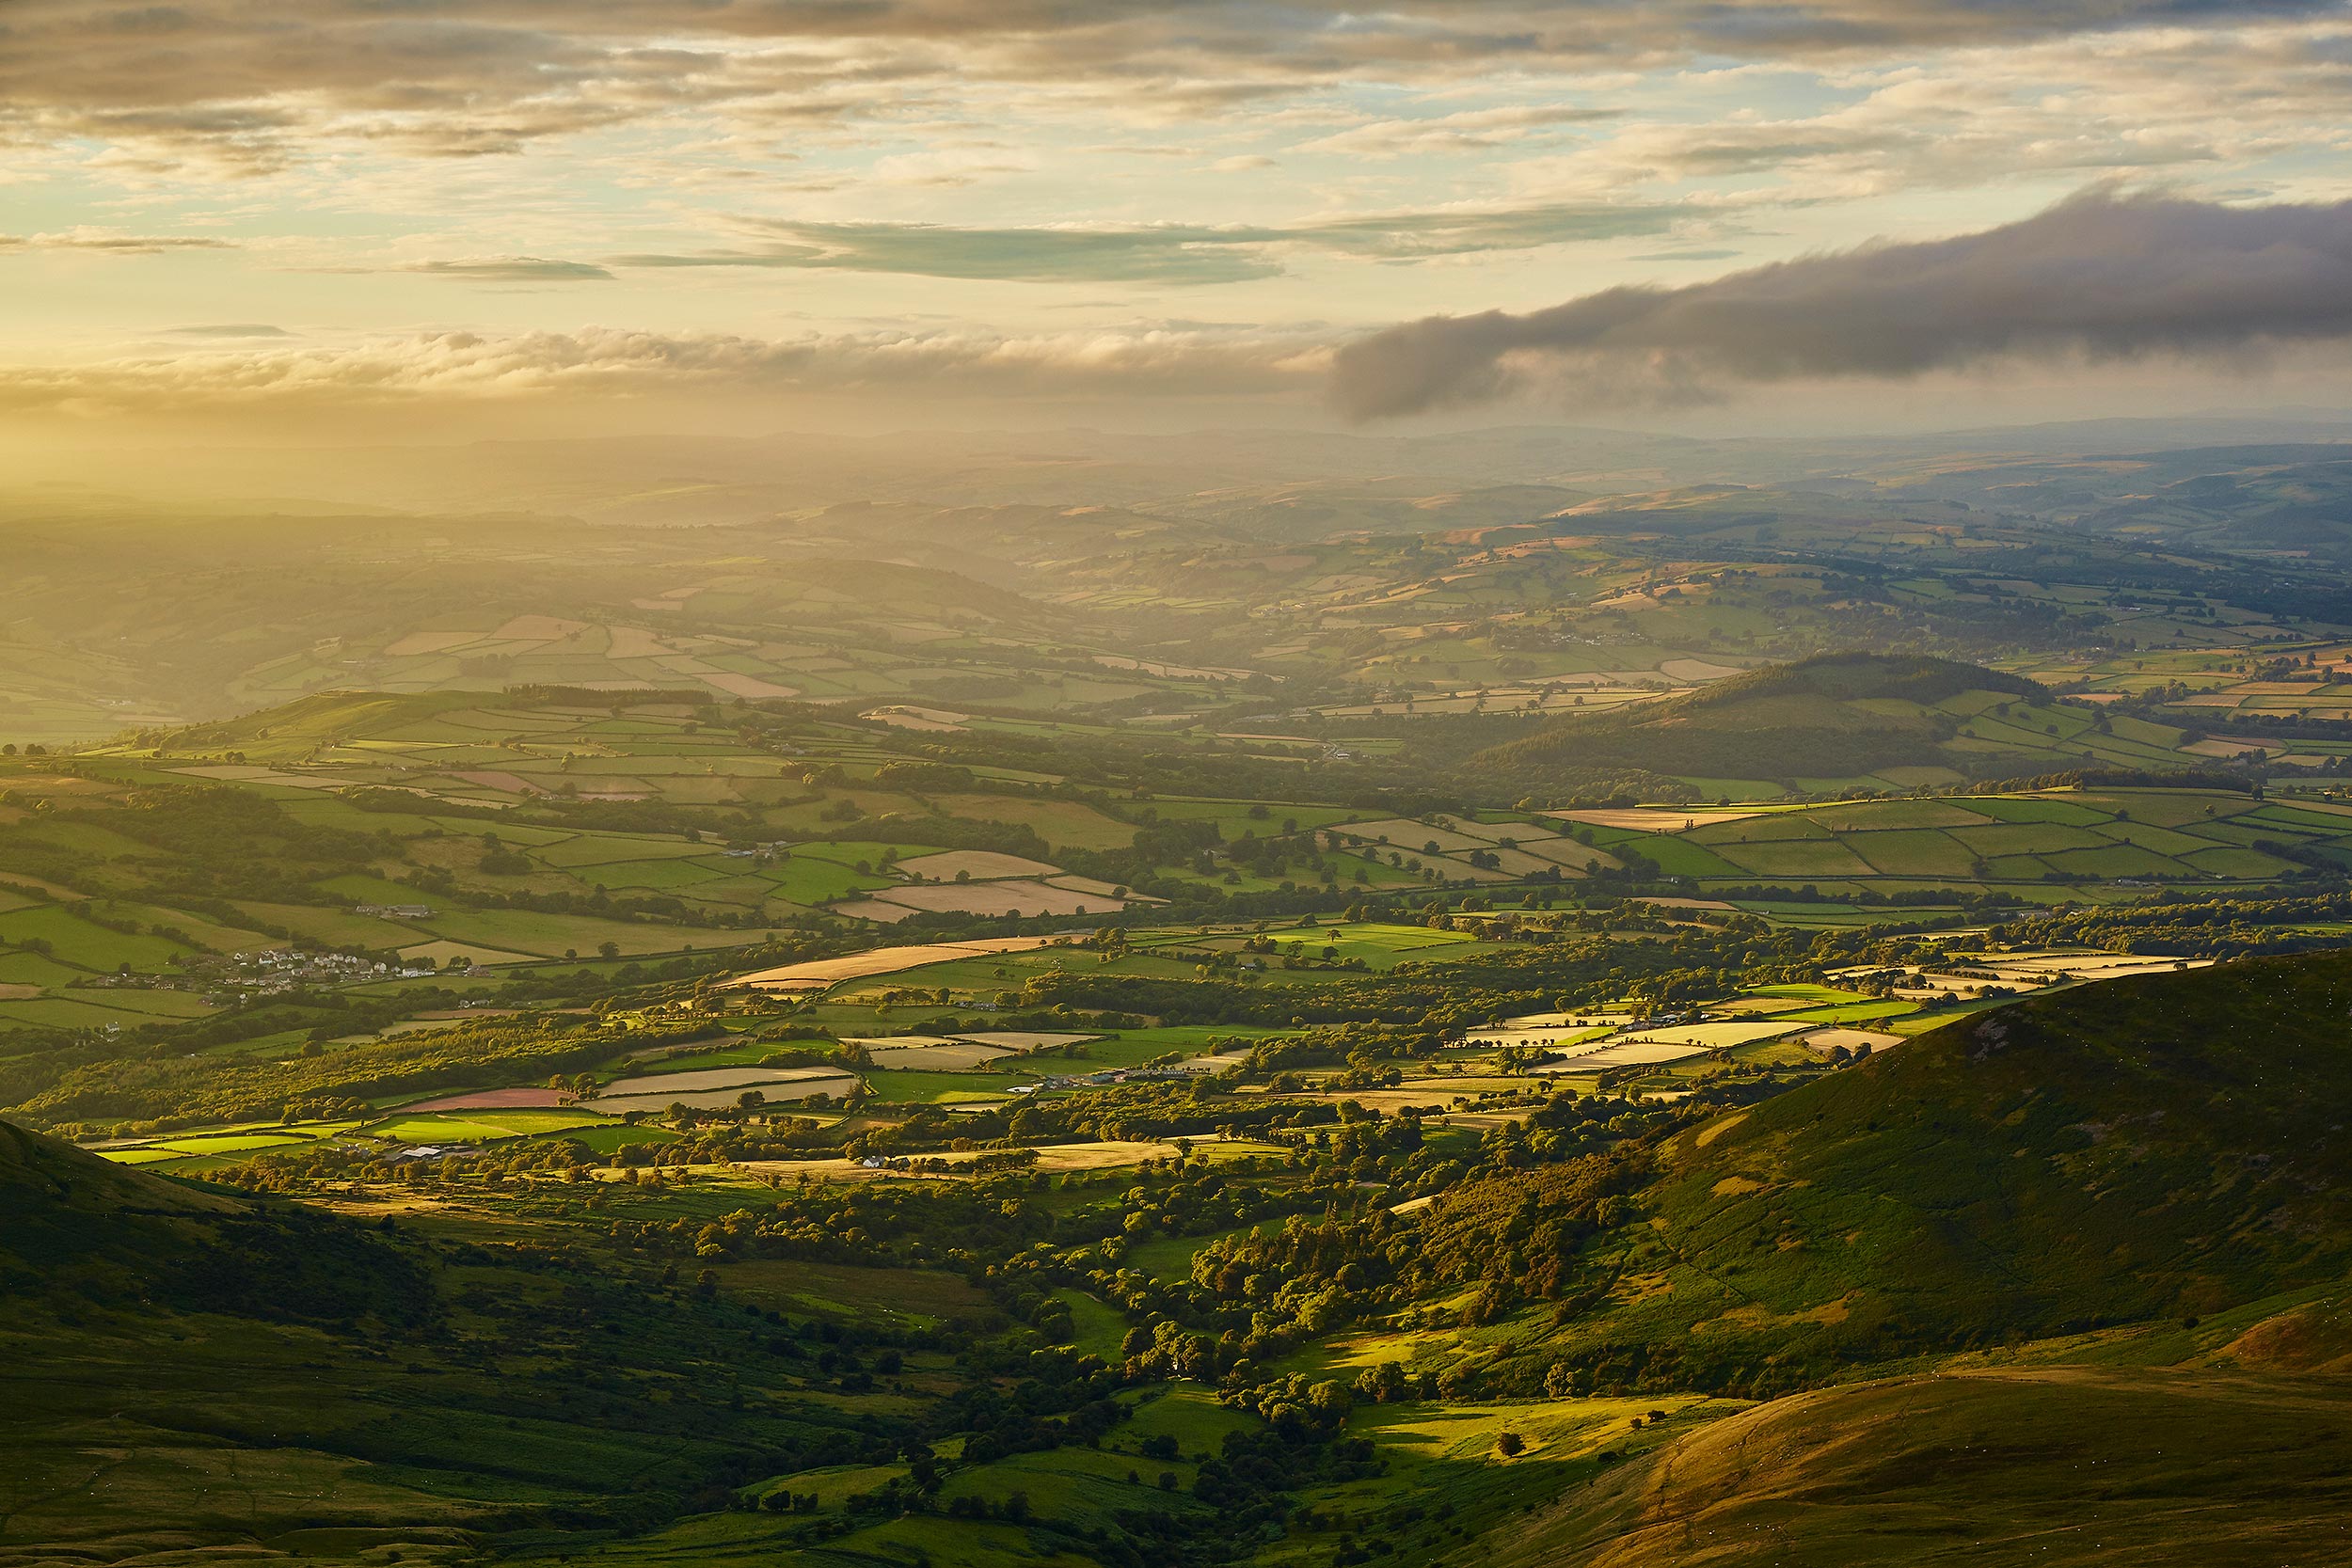 View from the Brecon Beacons, Wales, UK.  Landscape photography by Mike Caldwell